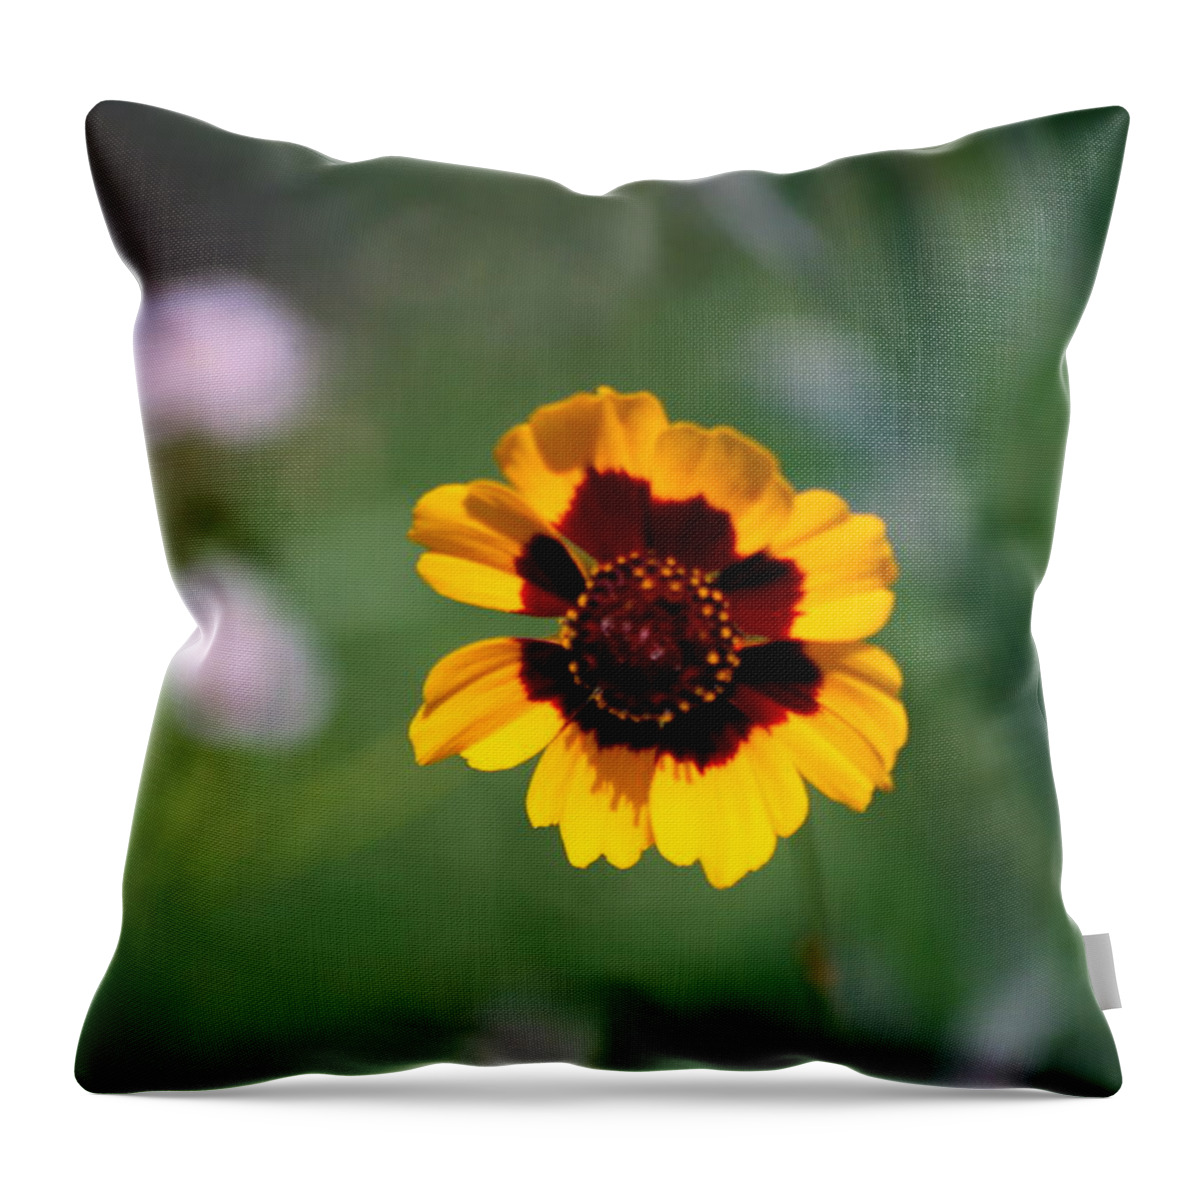 Wildflower Throw Pillow featuring the photograph Wildflower by Phil Burton